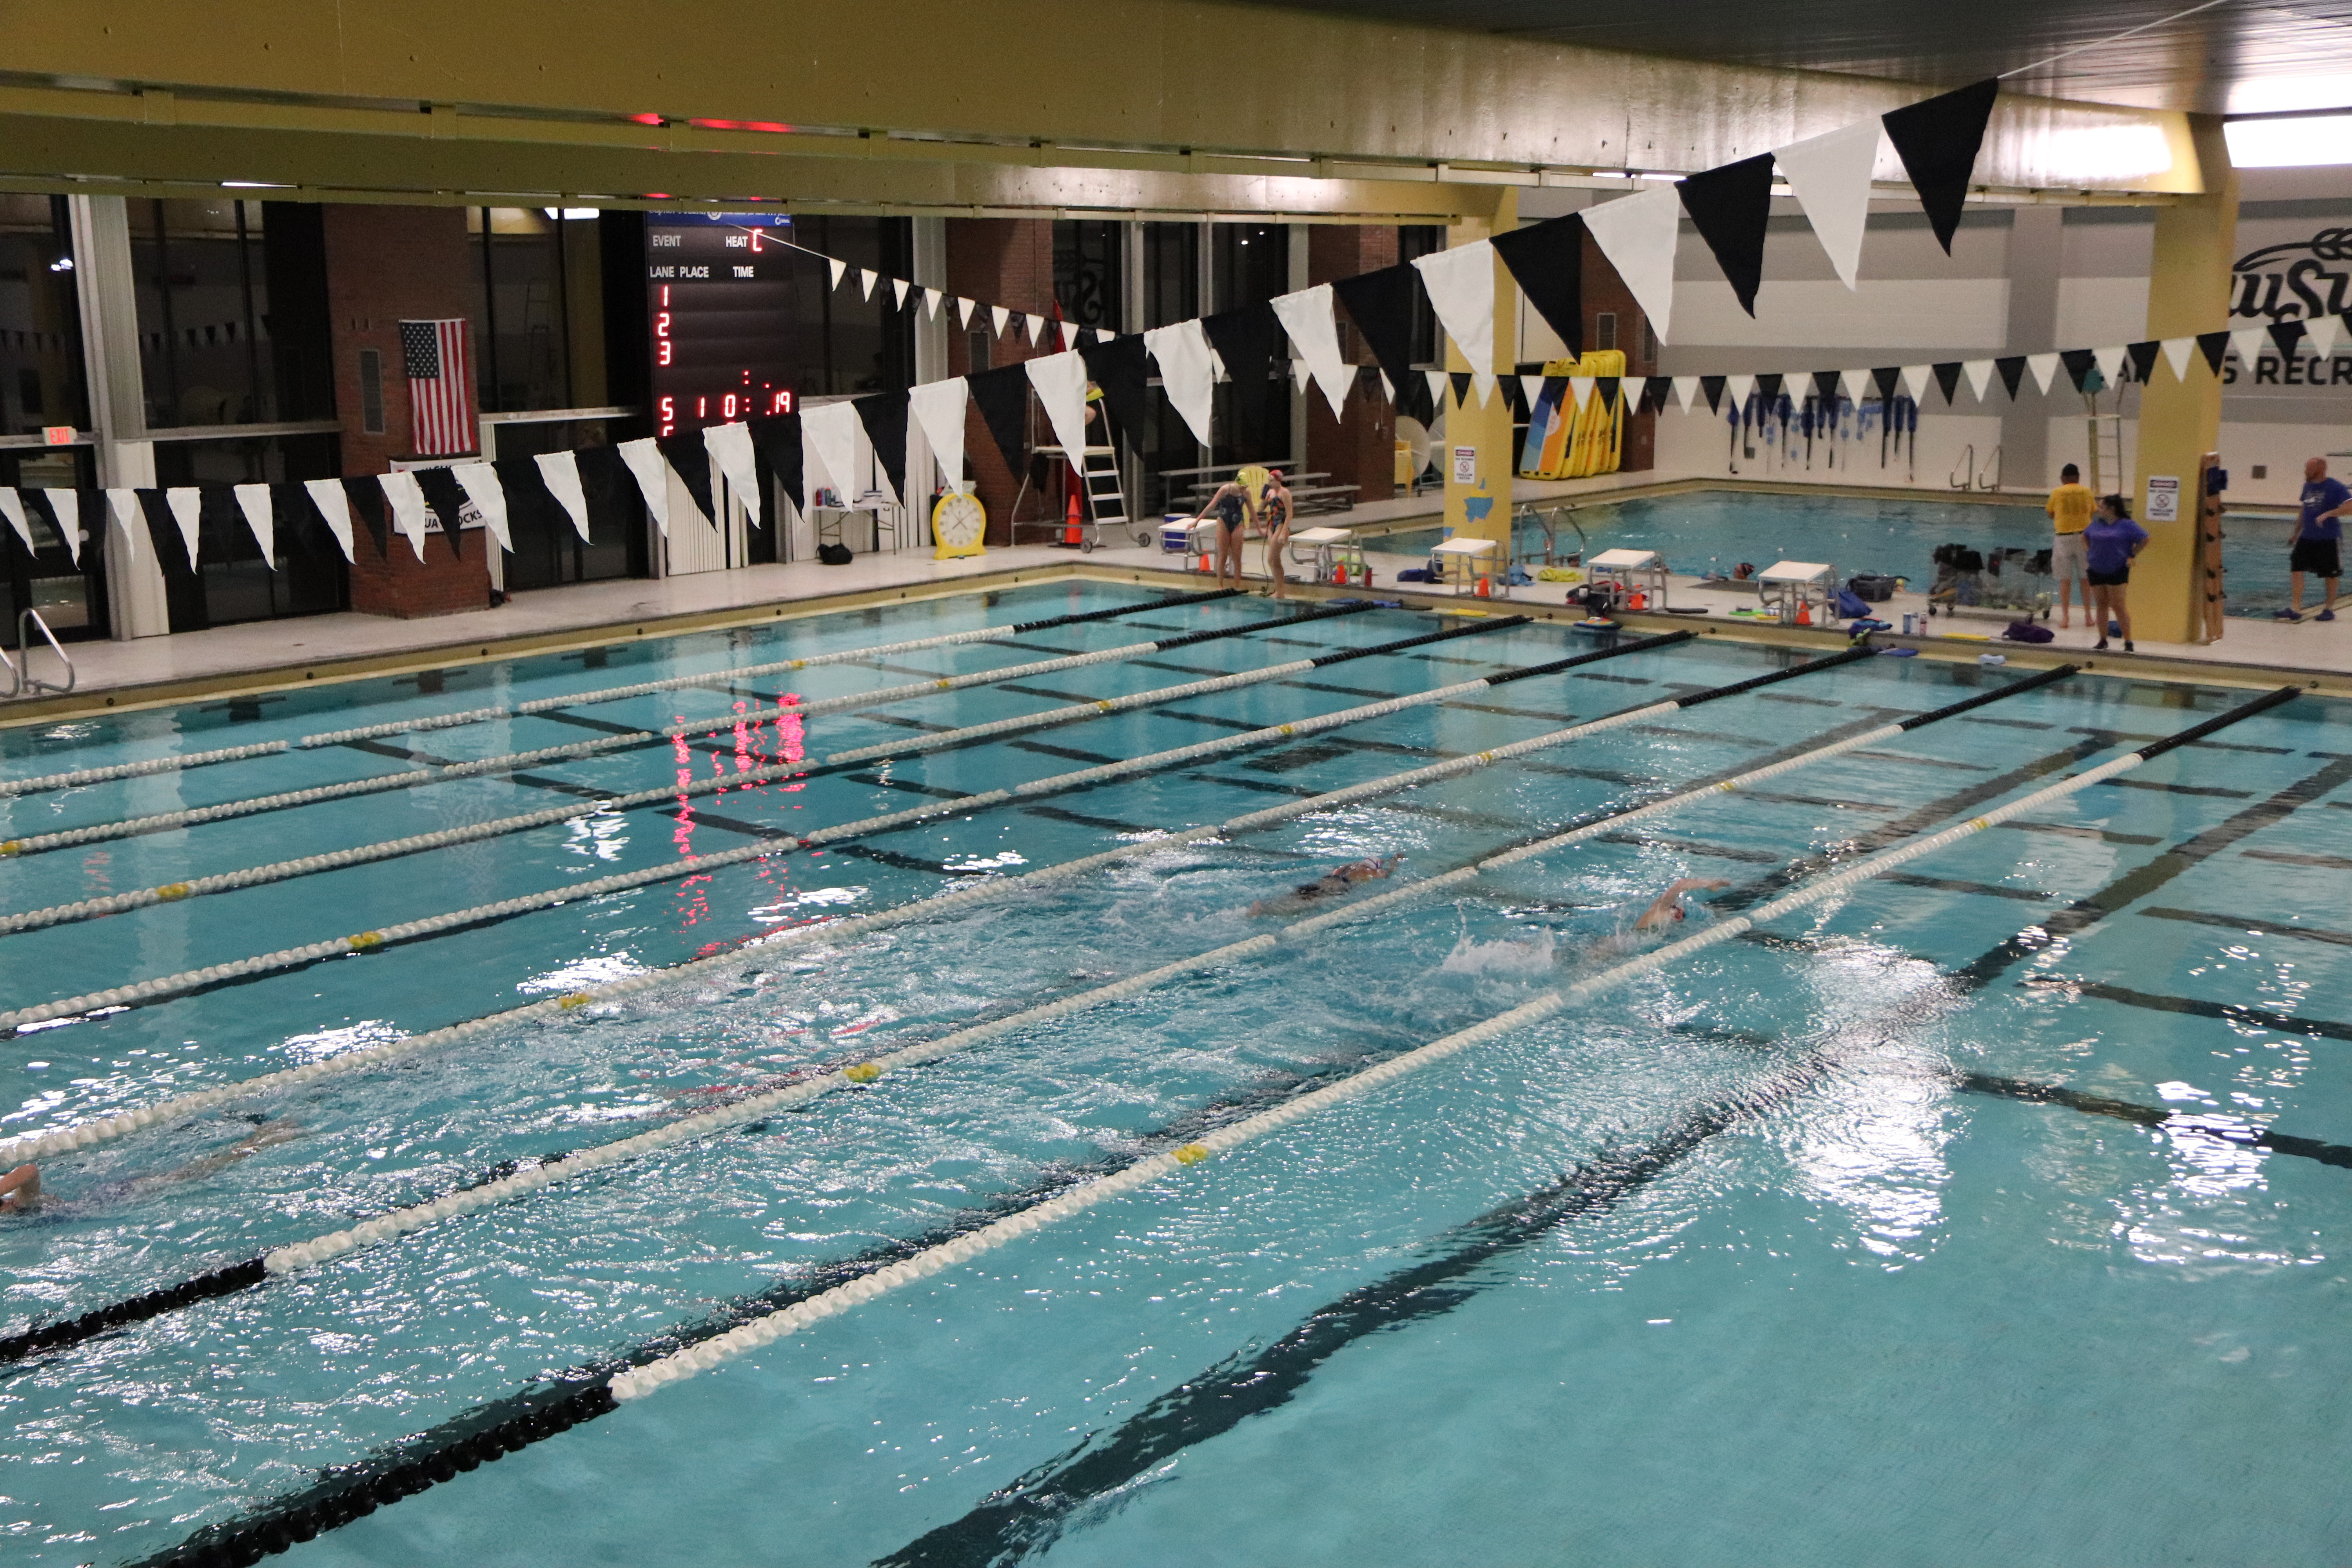 woman treading water, facing away, in the midst of jumbled lane lines